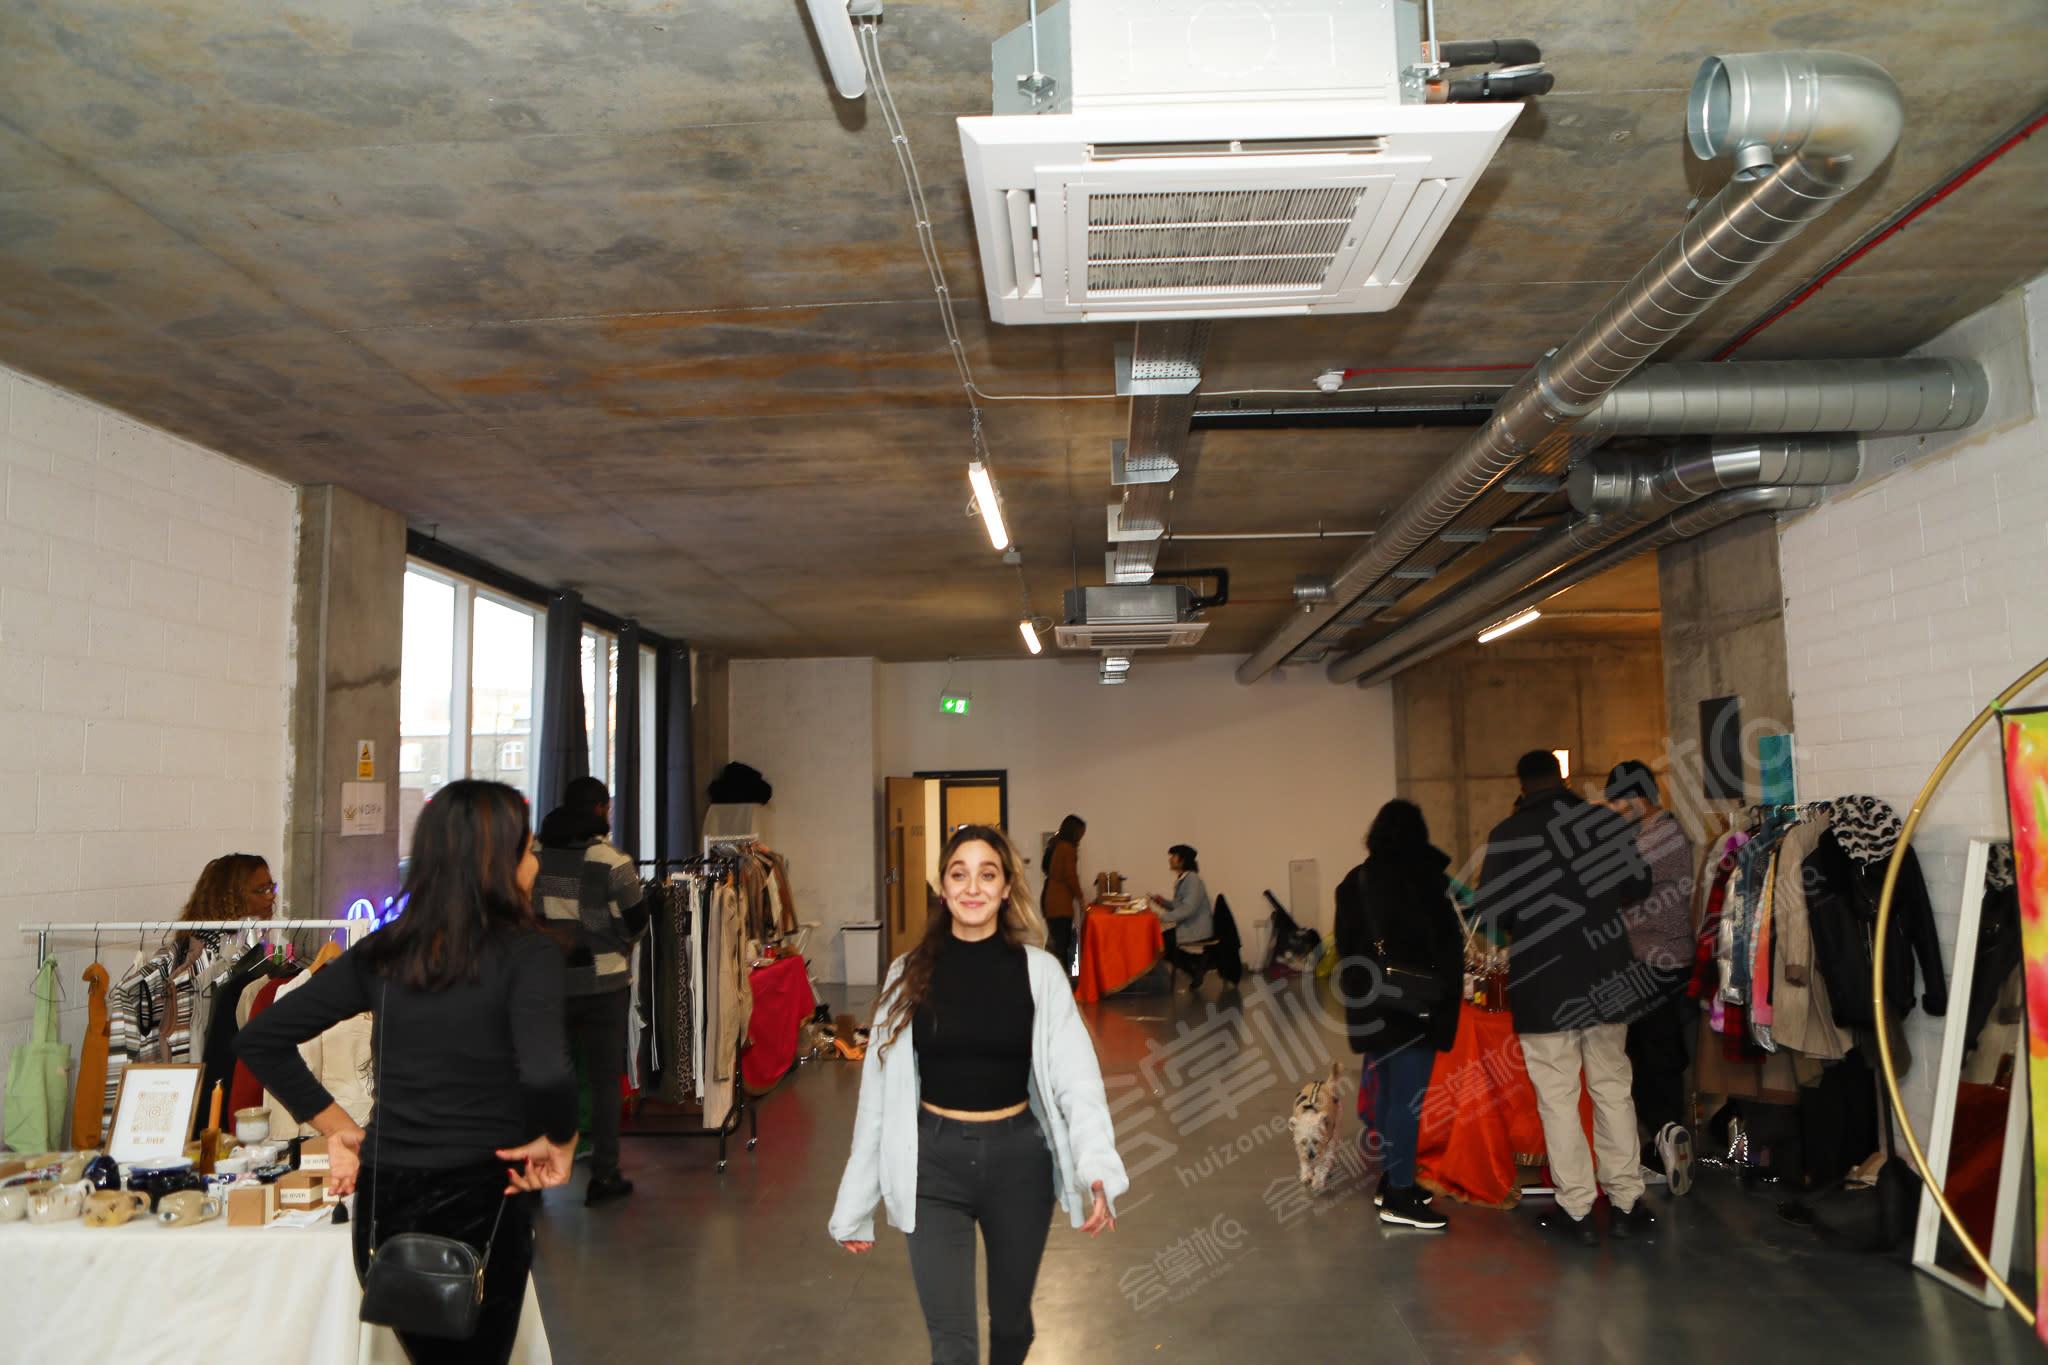 Hackney Wick -Pop Up Shop  / Gallery / Fashion Show / Events / Storefront / Presentations /  Workshops / Exhibitions /Screenings Venue